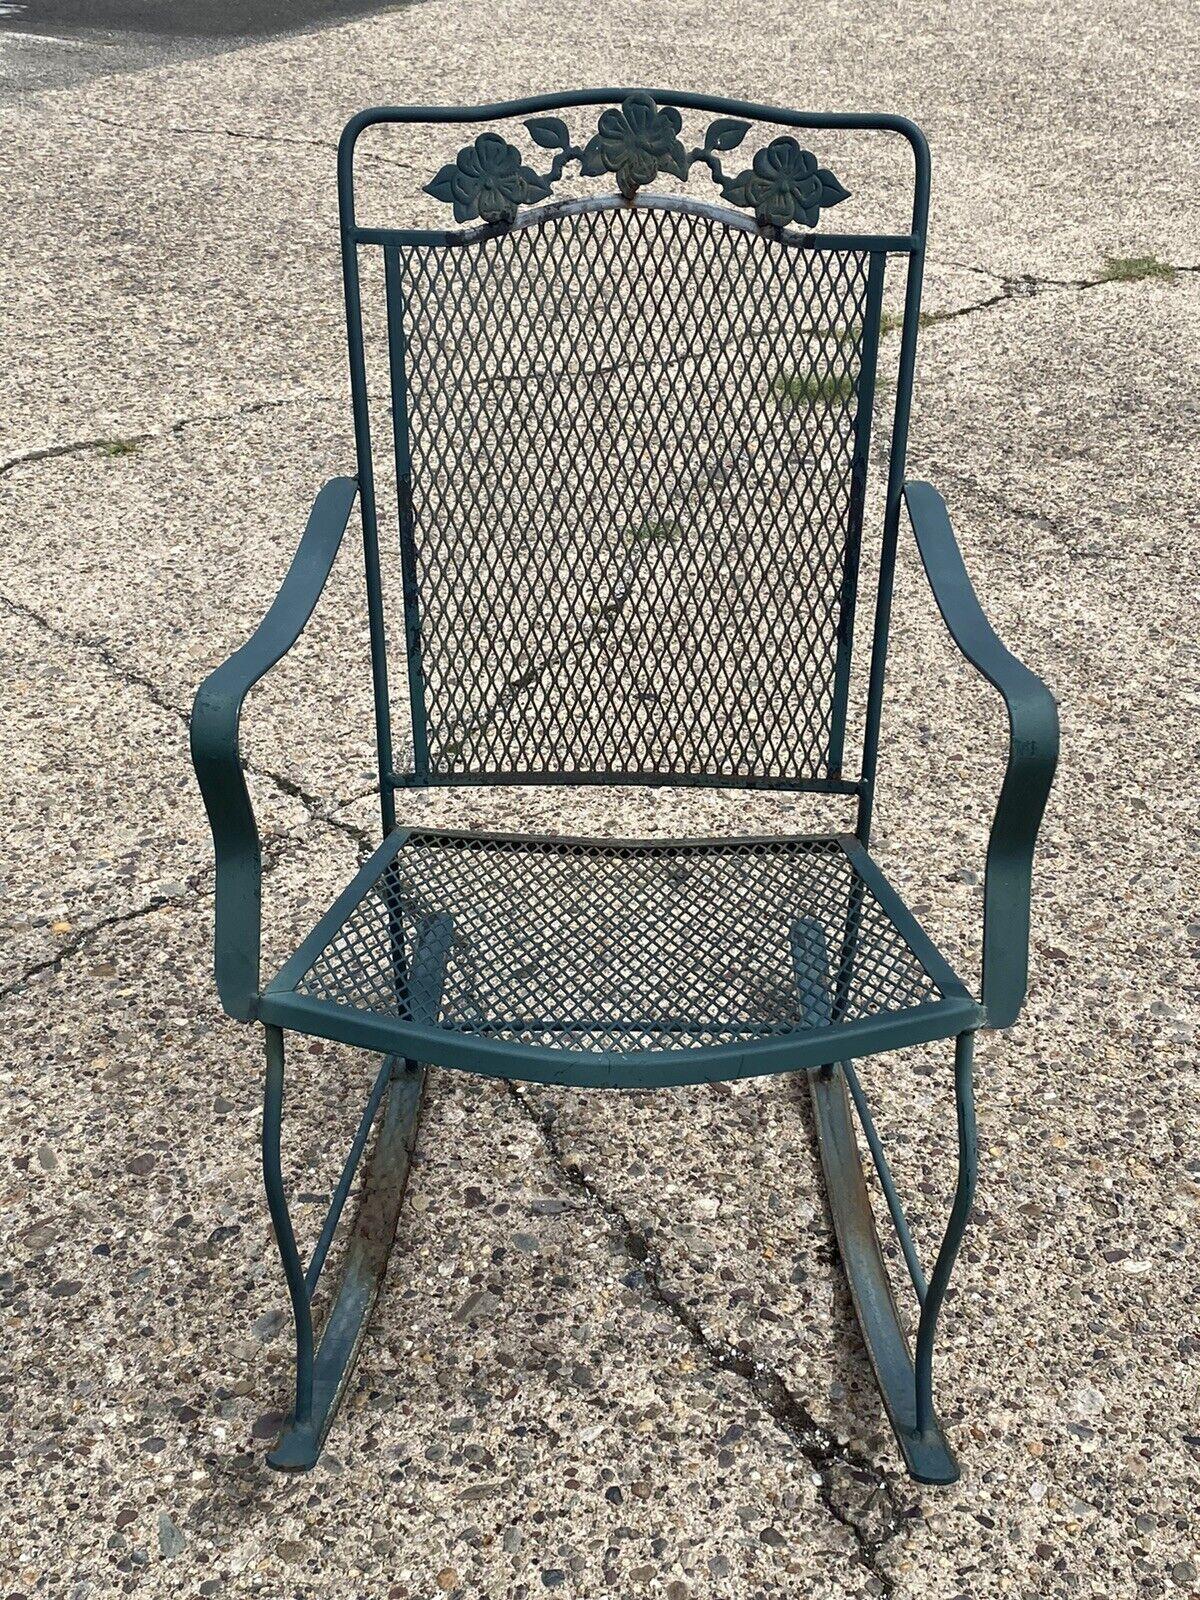 Vintage wrought iron Victorian style green garden patio rocker rocking chair. Item features wrought iron construction, very nice vintage item, great style and form, possibly Meadowcraft Dogwood pattern. Circa mid to late 20th century. Measurements: